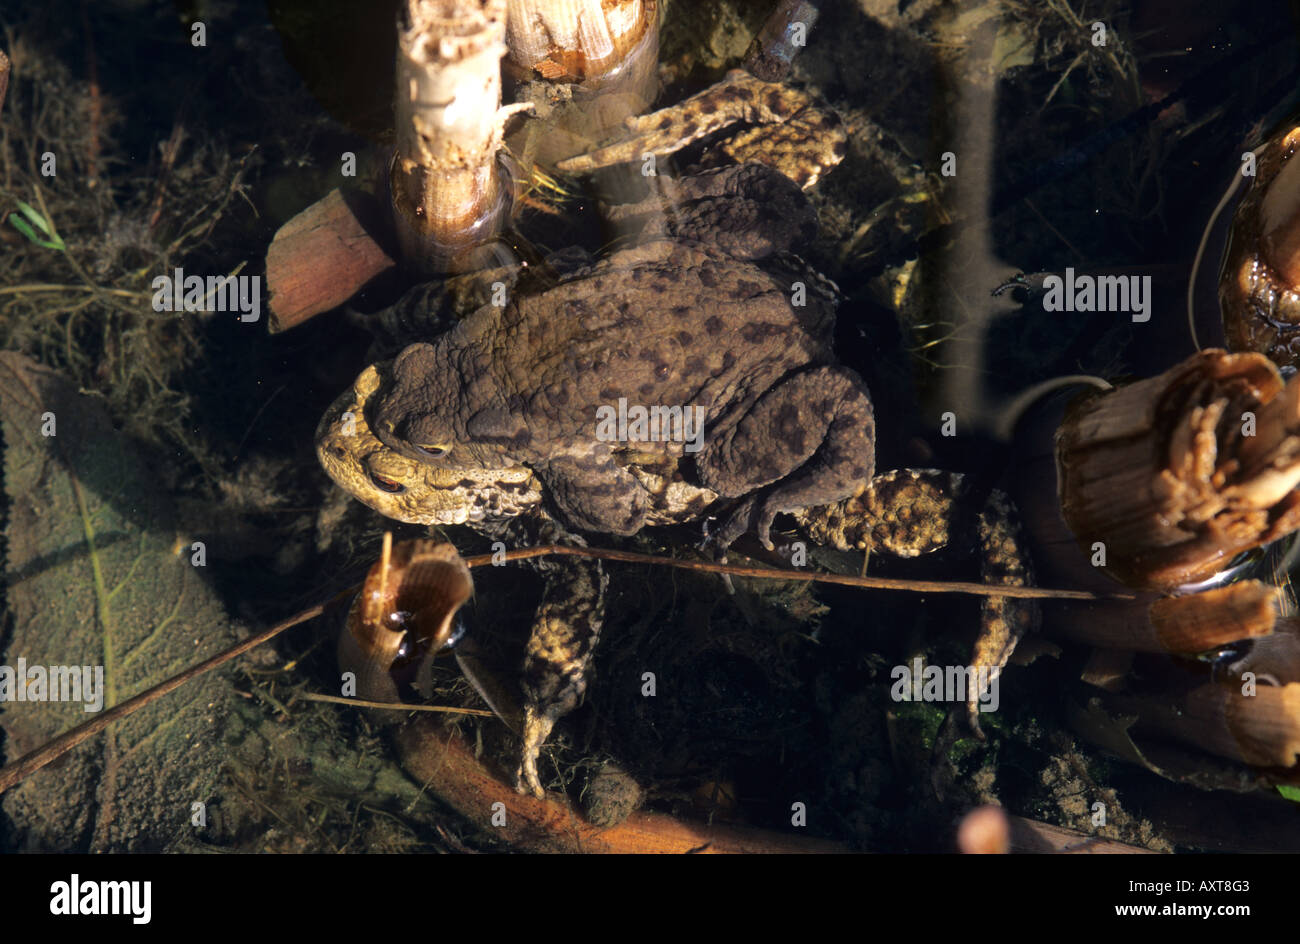 Mating pair of common toads Bufo bufo in garden pond Stock Photo